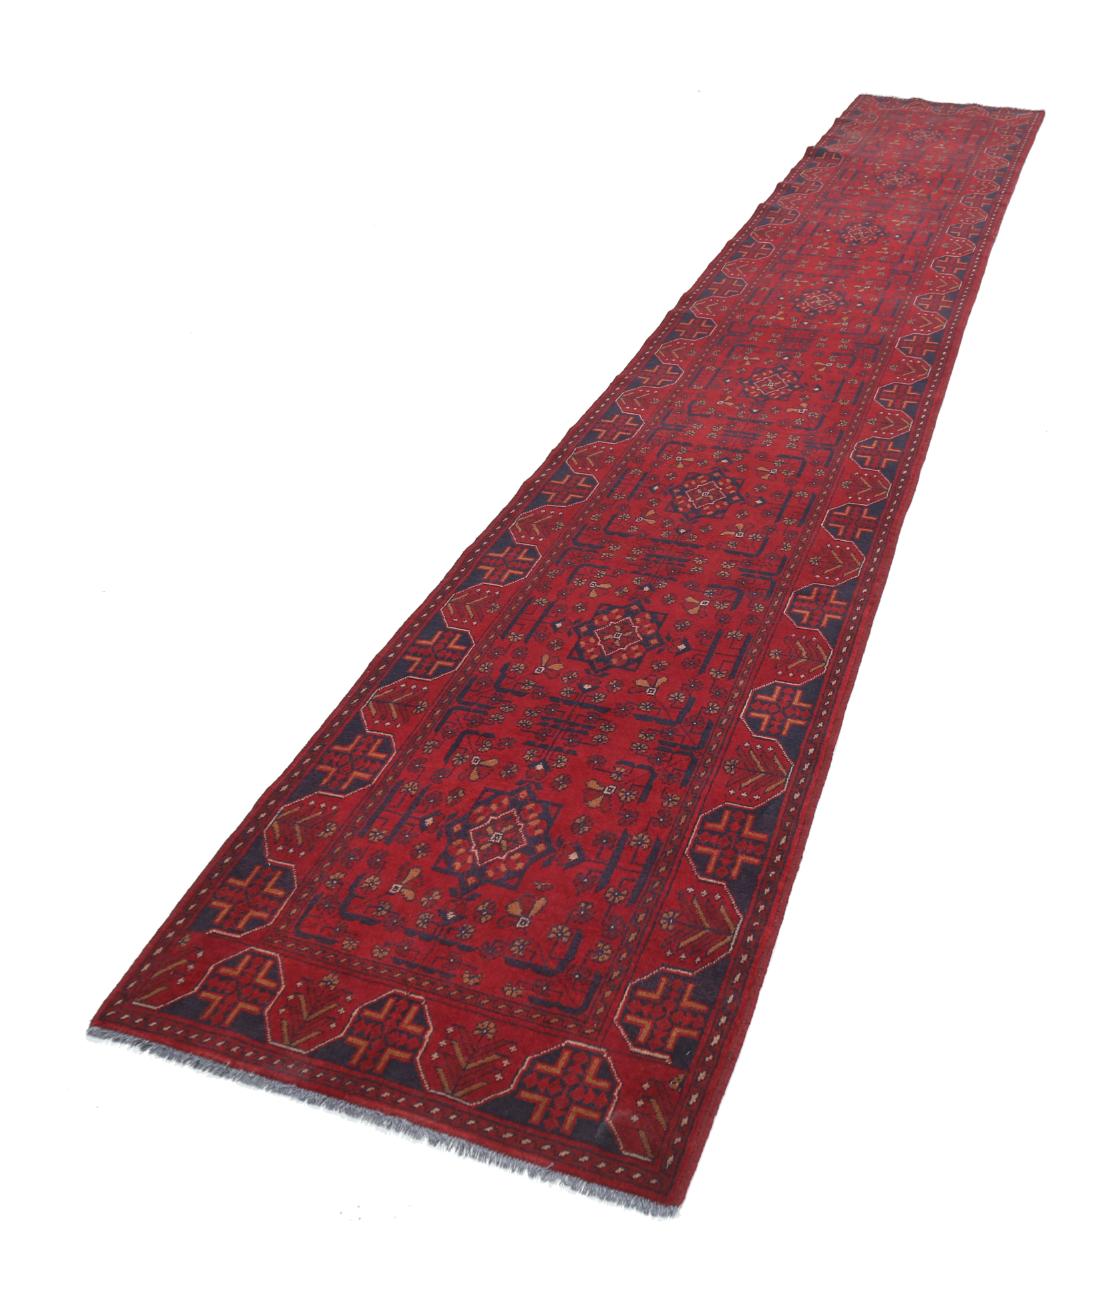 Afghan 2' 6" X 15' 11" Hand-Knotted Wool Rug 2' 6" X 15' 11" (76 X 485) / Red / Black